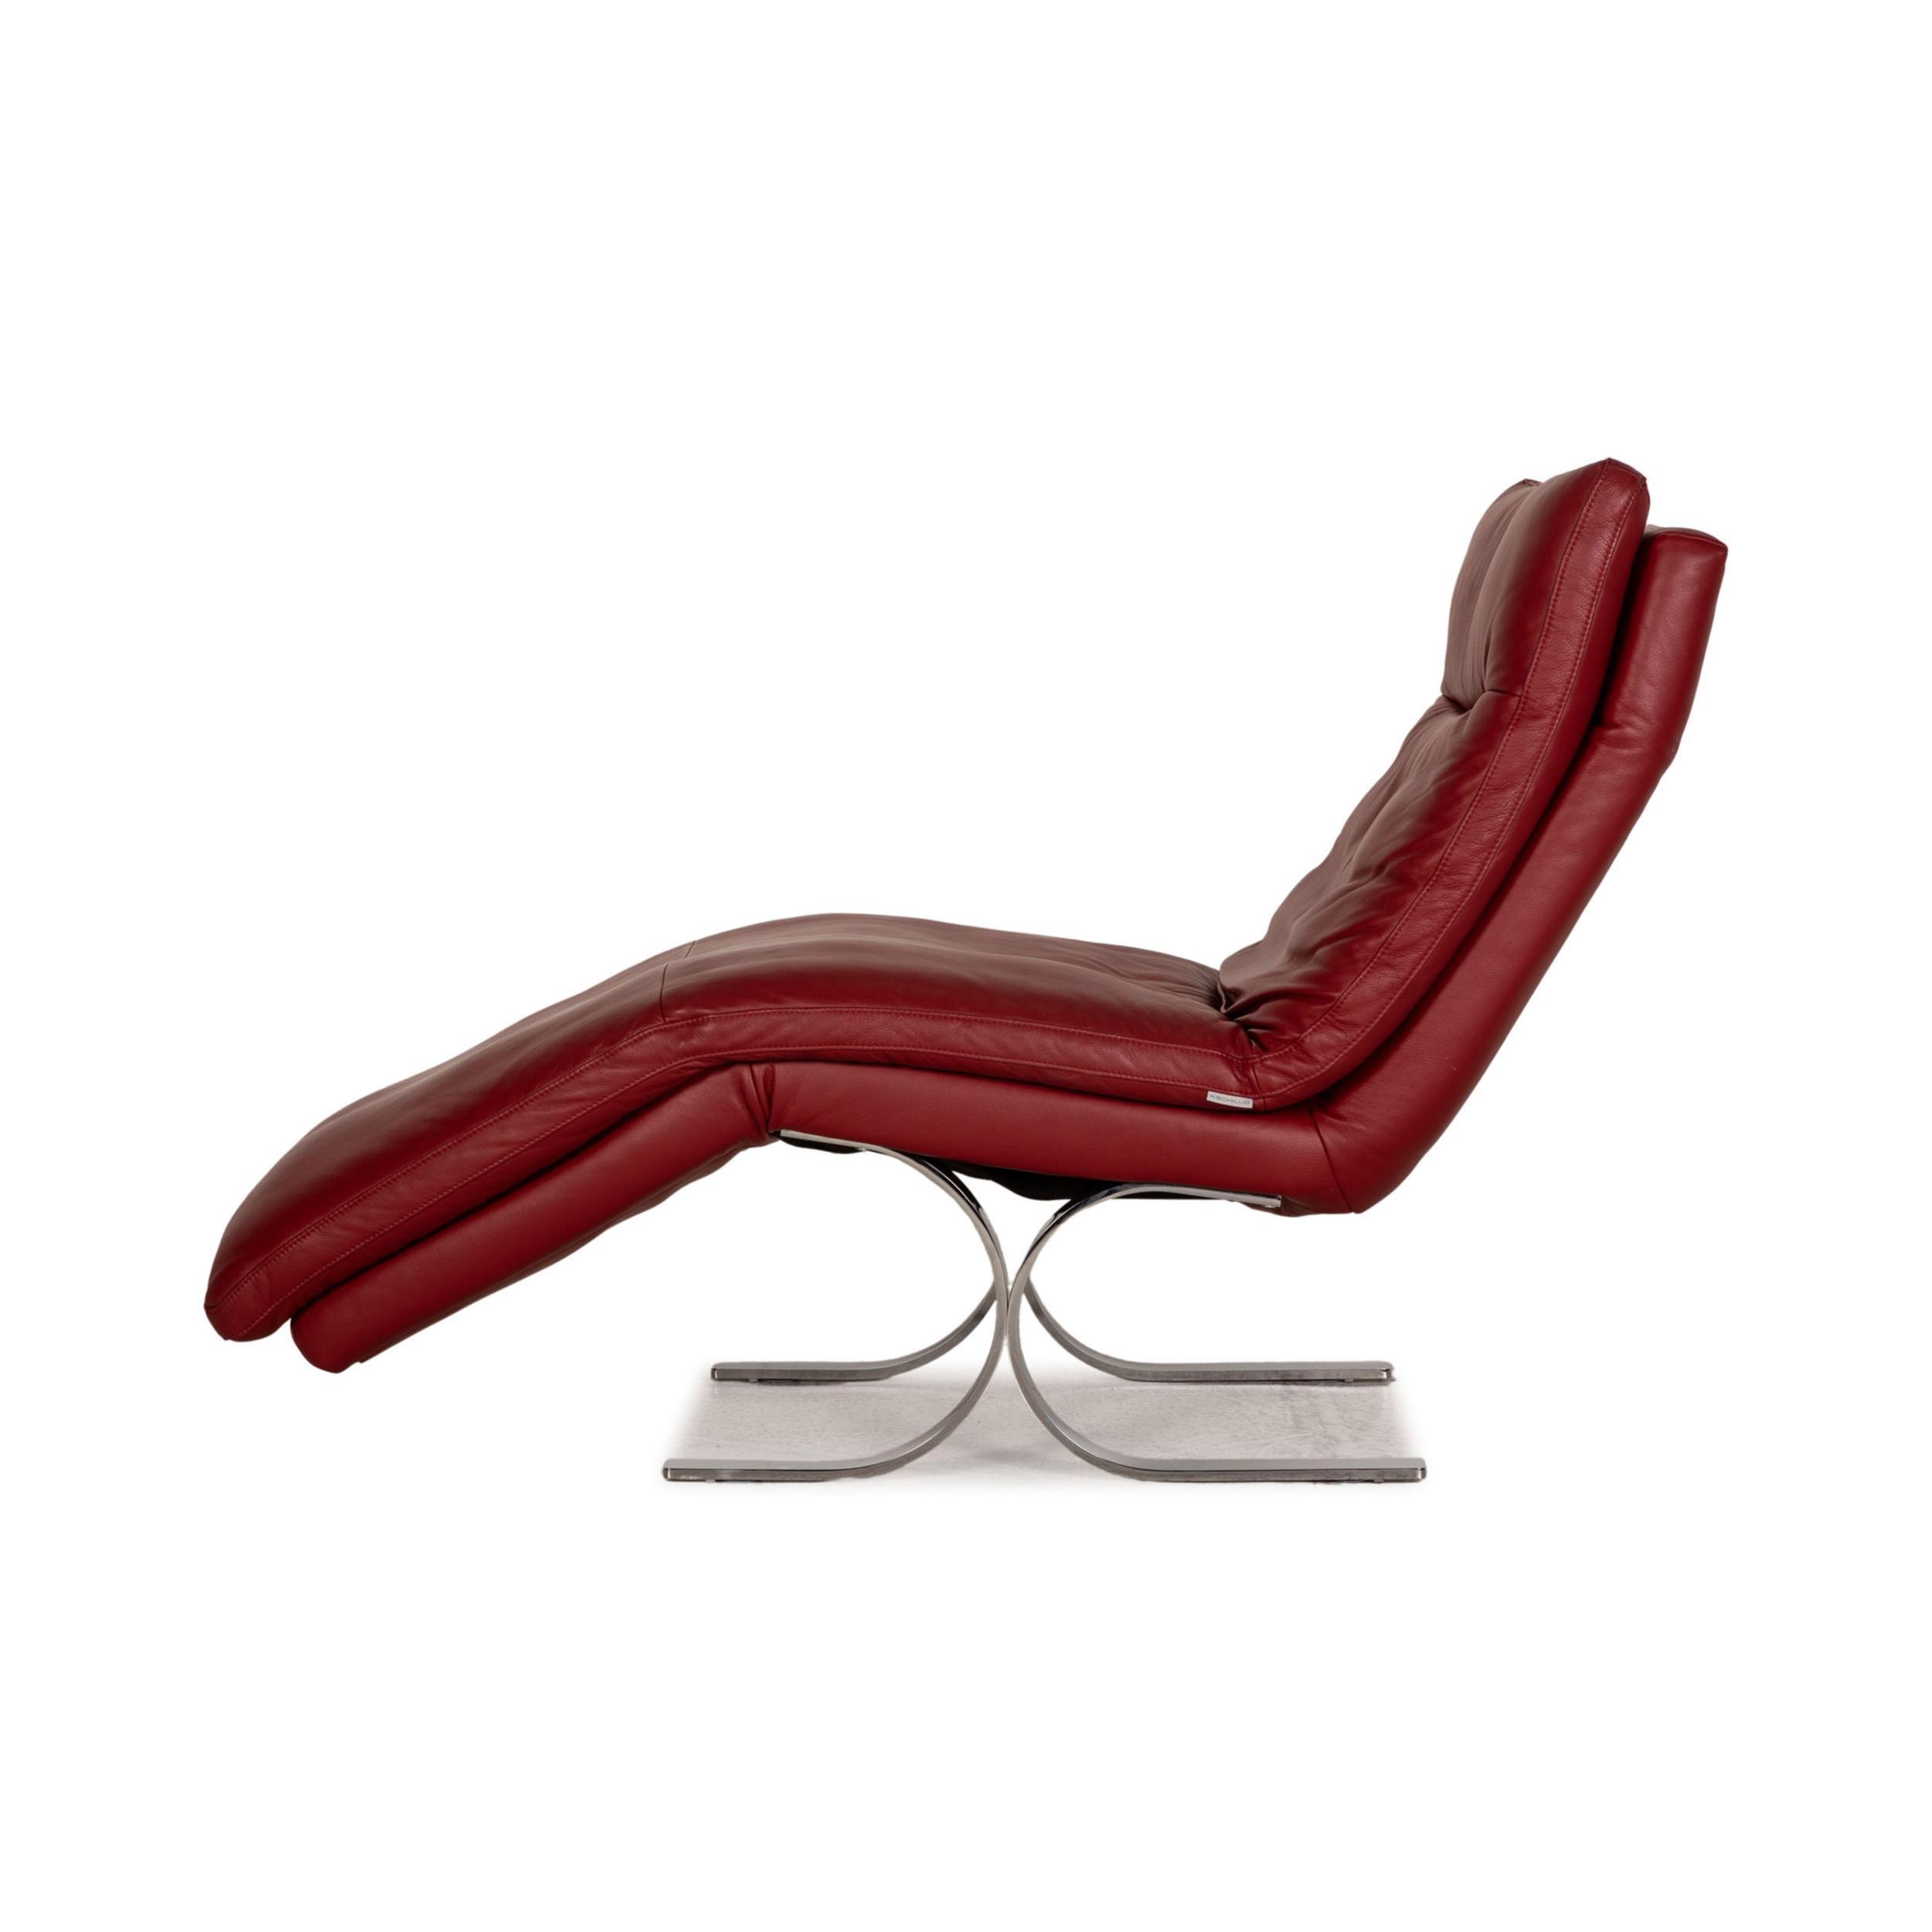 Willi Schillig Daily Dreams Leather Lounger Red Function Relaxation Function For Sale 4